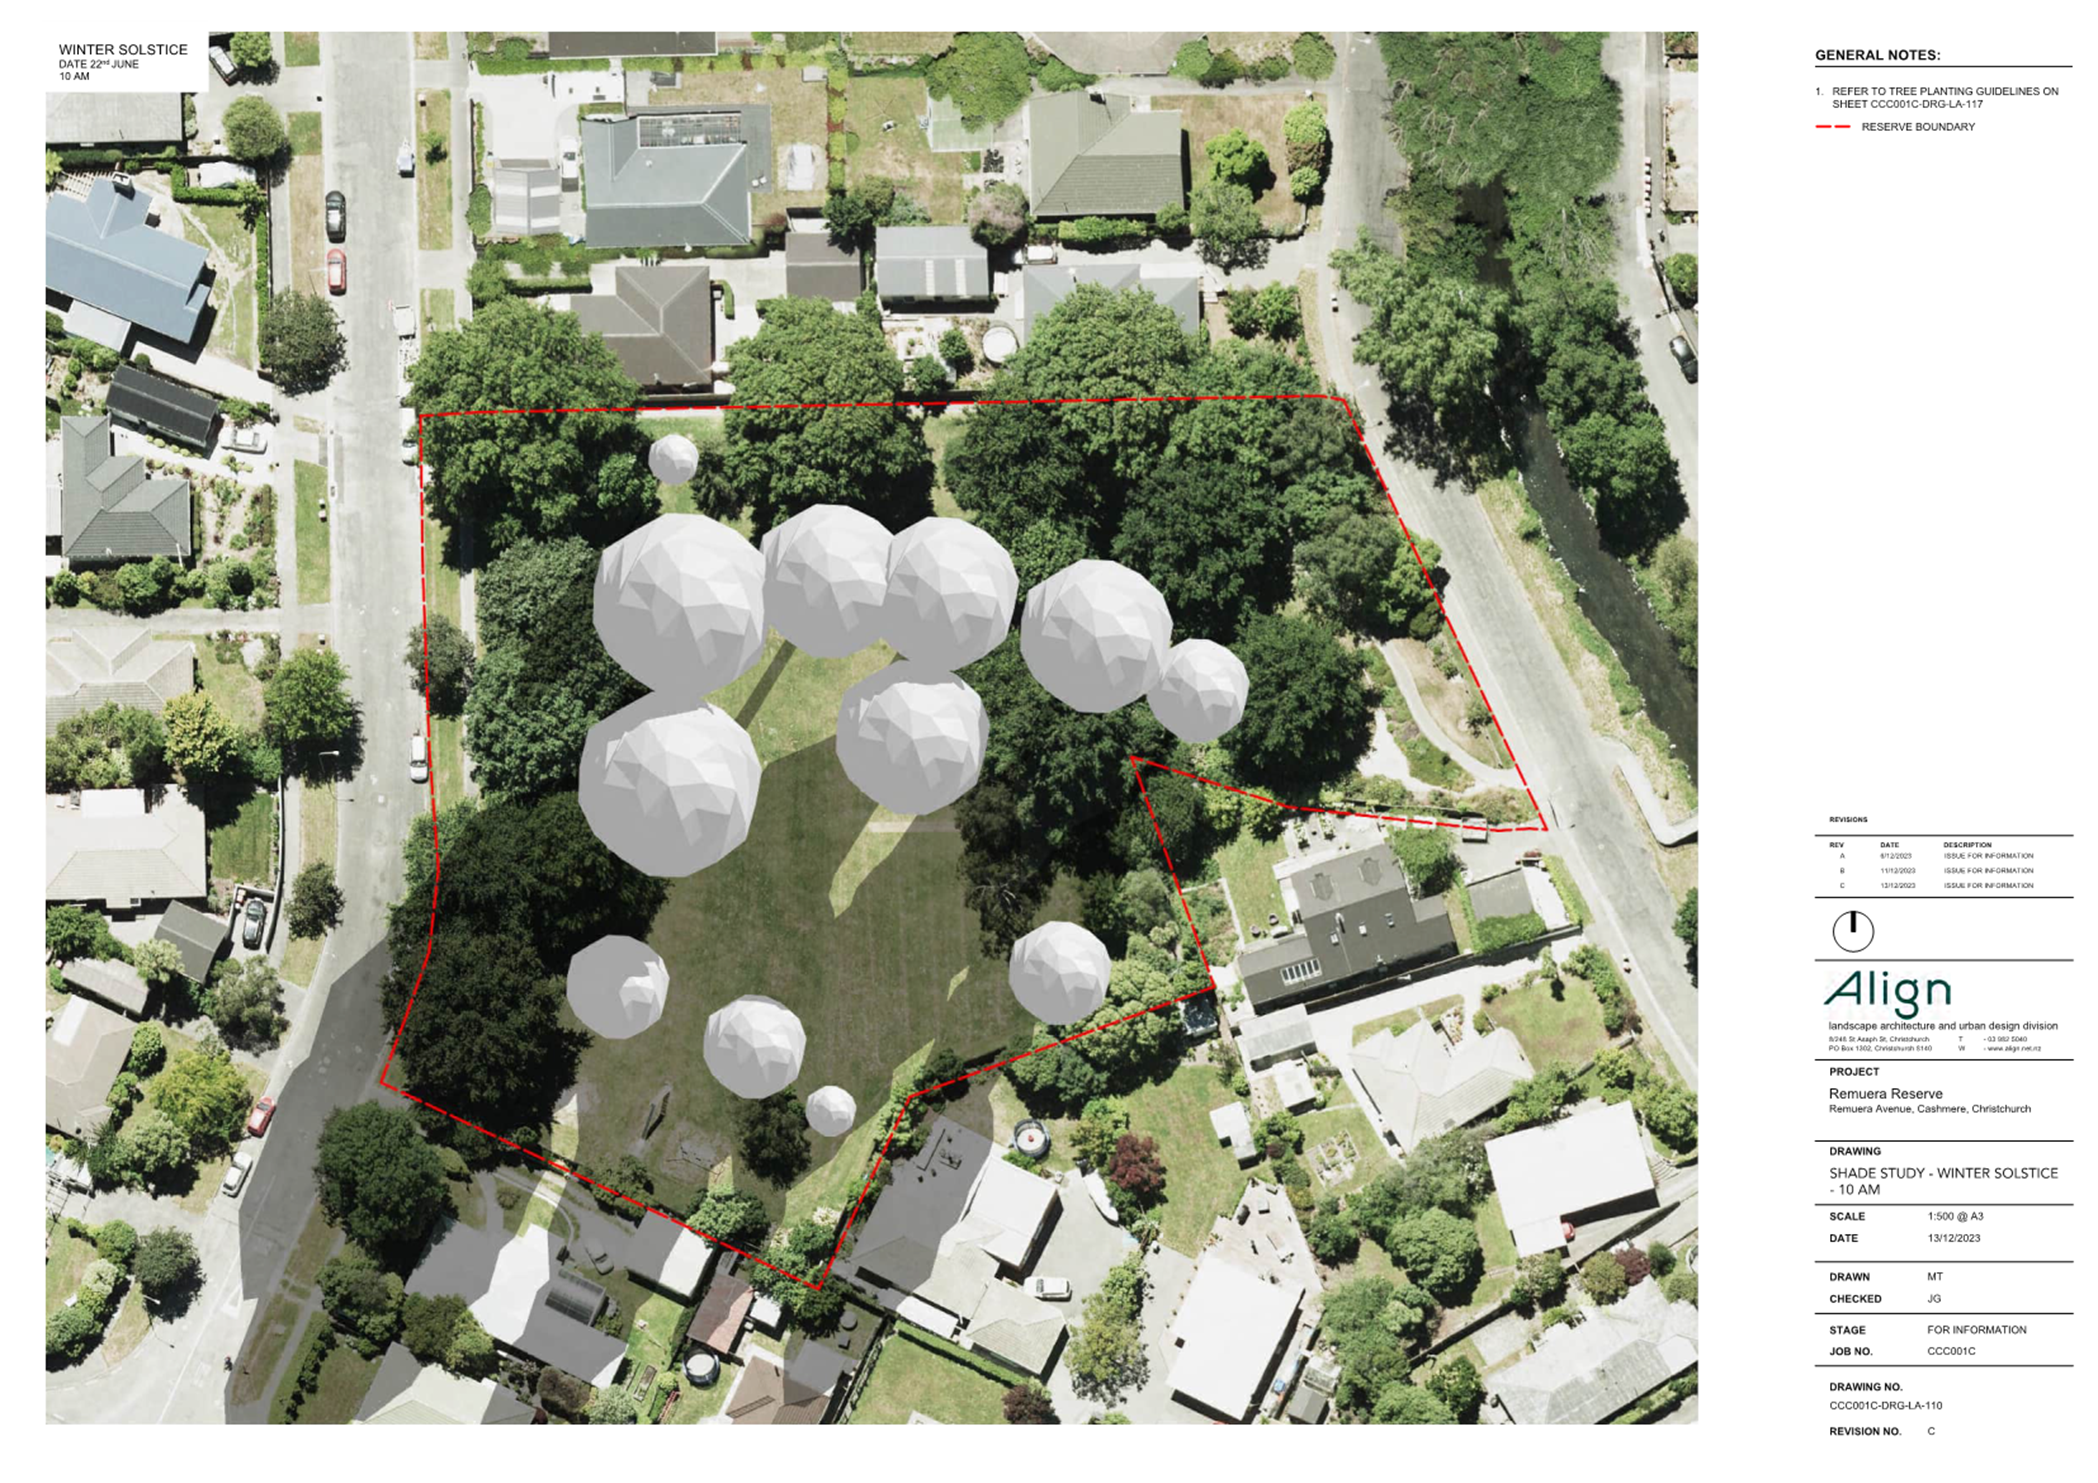 Aerial view of a neighborhood with many white balls

Description automatically generated